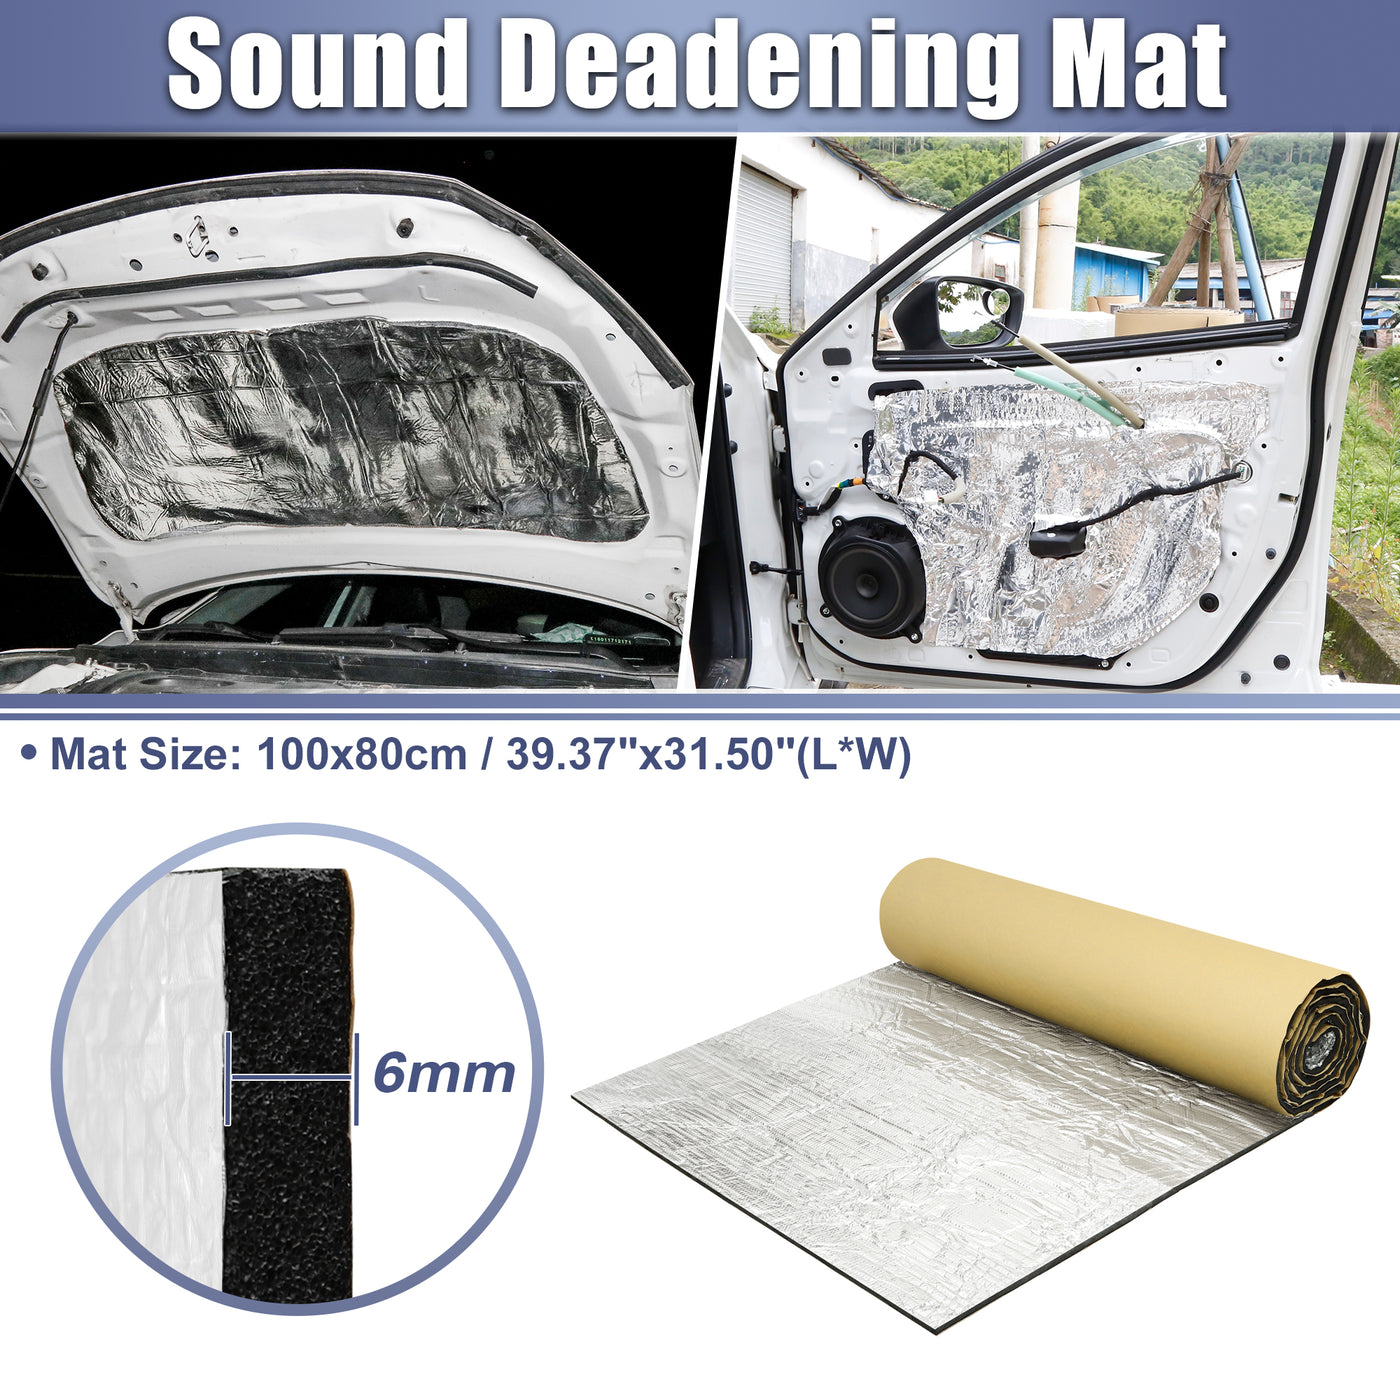 X AUTOHAUX 236mil 6mm 8.61sqft Car Sound Deadening Mat Aluminum Closed Cell Foam Heat Shield Material Damping Self Adhesive Universal for Hood Fender and Boat Engine Cover 39.37"x31.50"